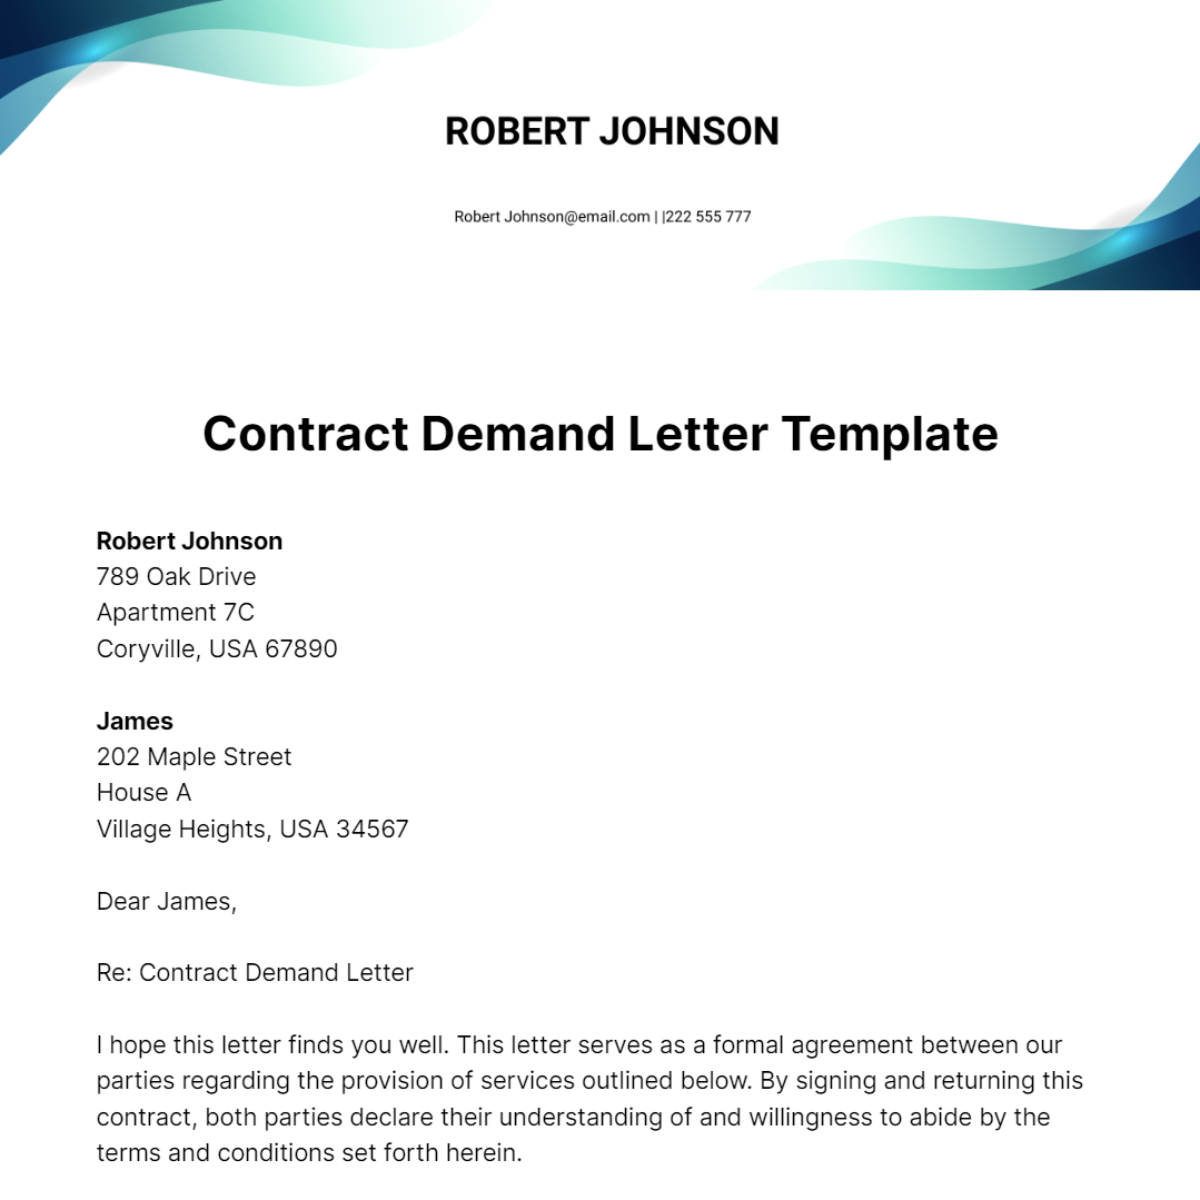 Contract Demand Letter Template